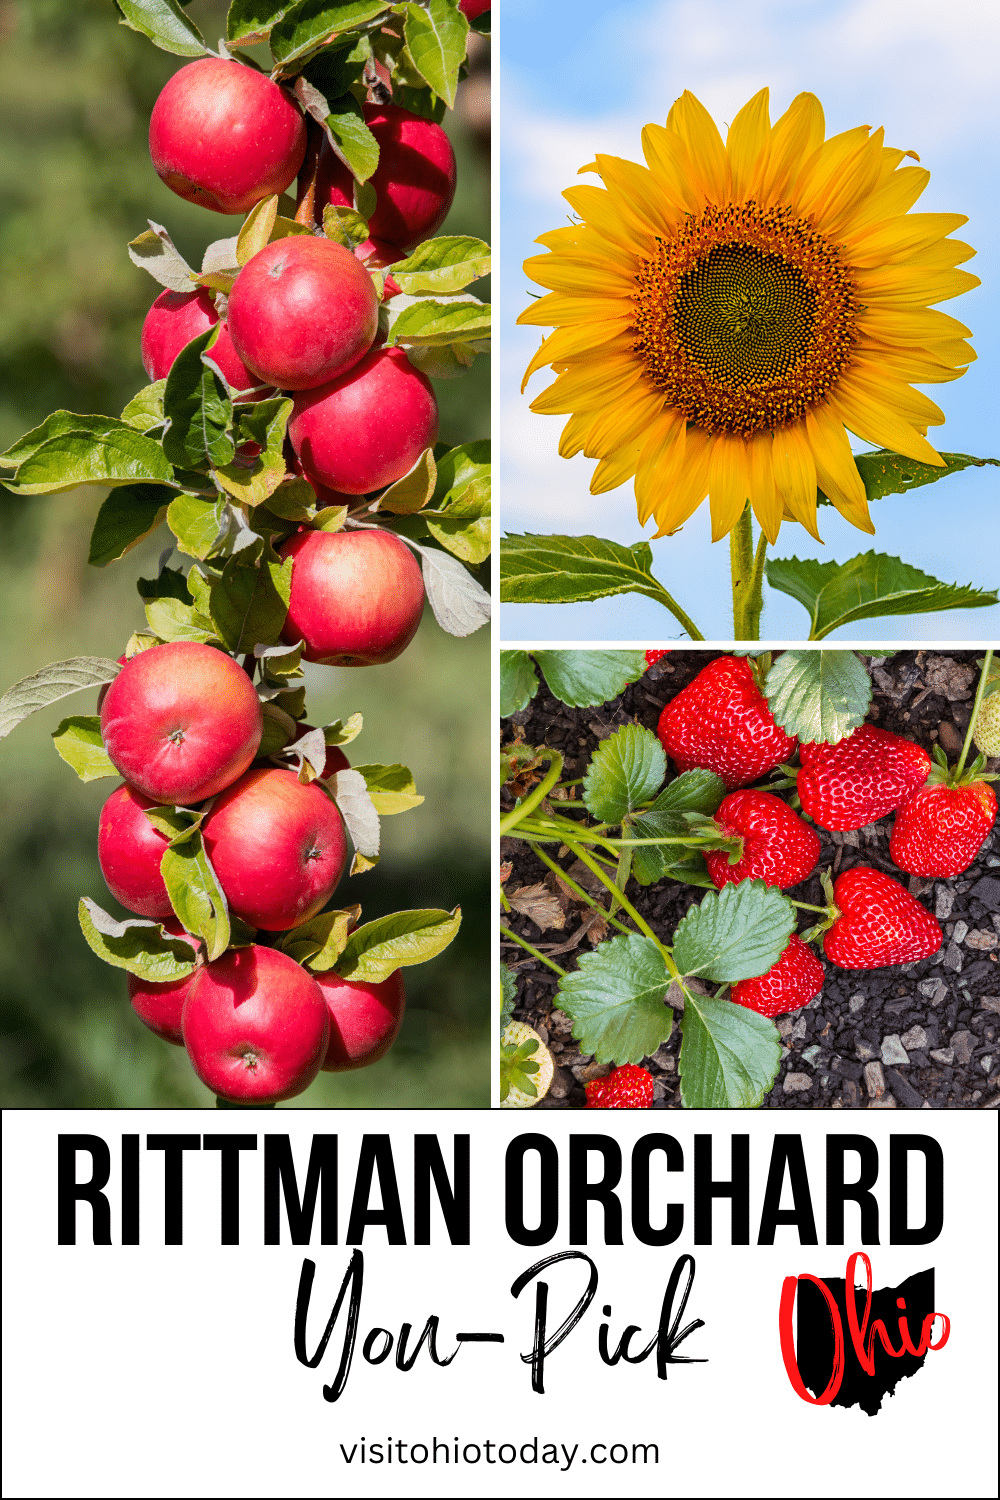 vertical image with a photo on the left of a branch with red apples on it, a photo of a sunflower and one of strawberries on the plant on the right. A white strip at the bottom has the text rittman Orchard You-Pick